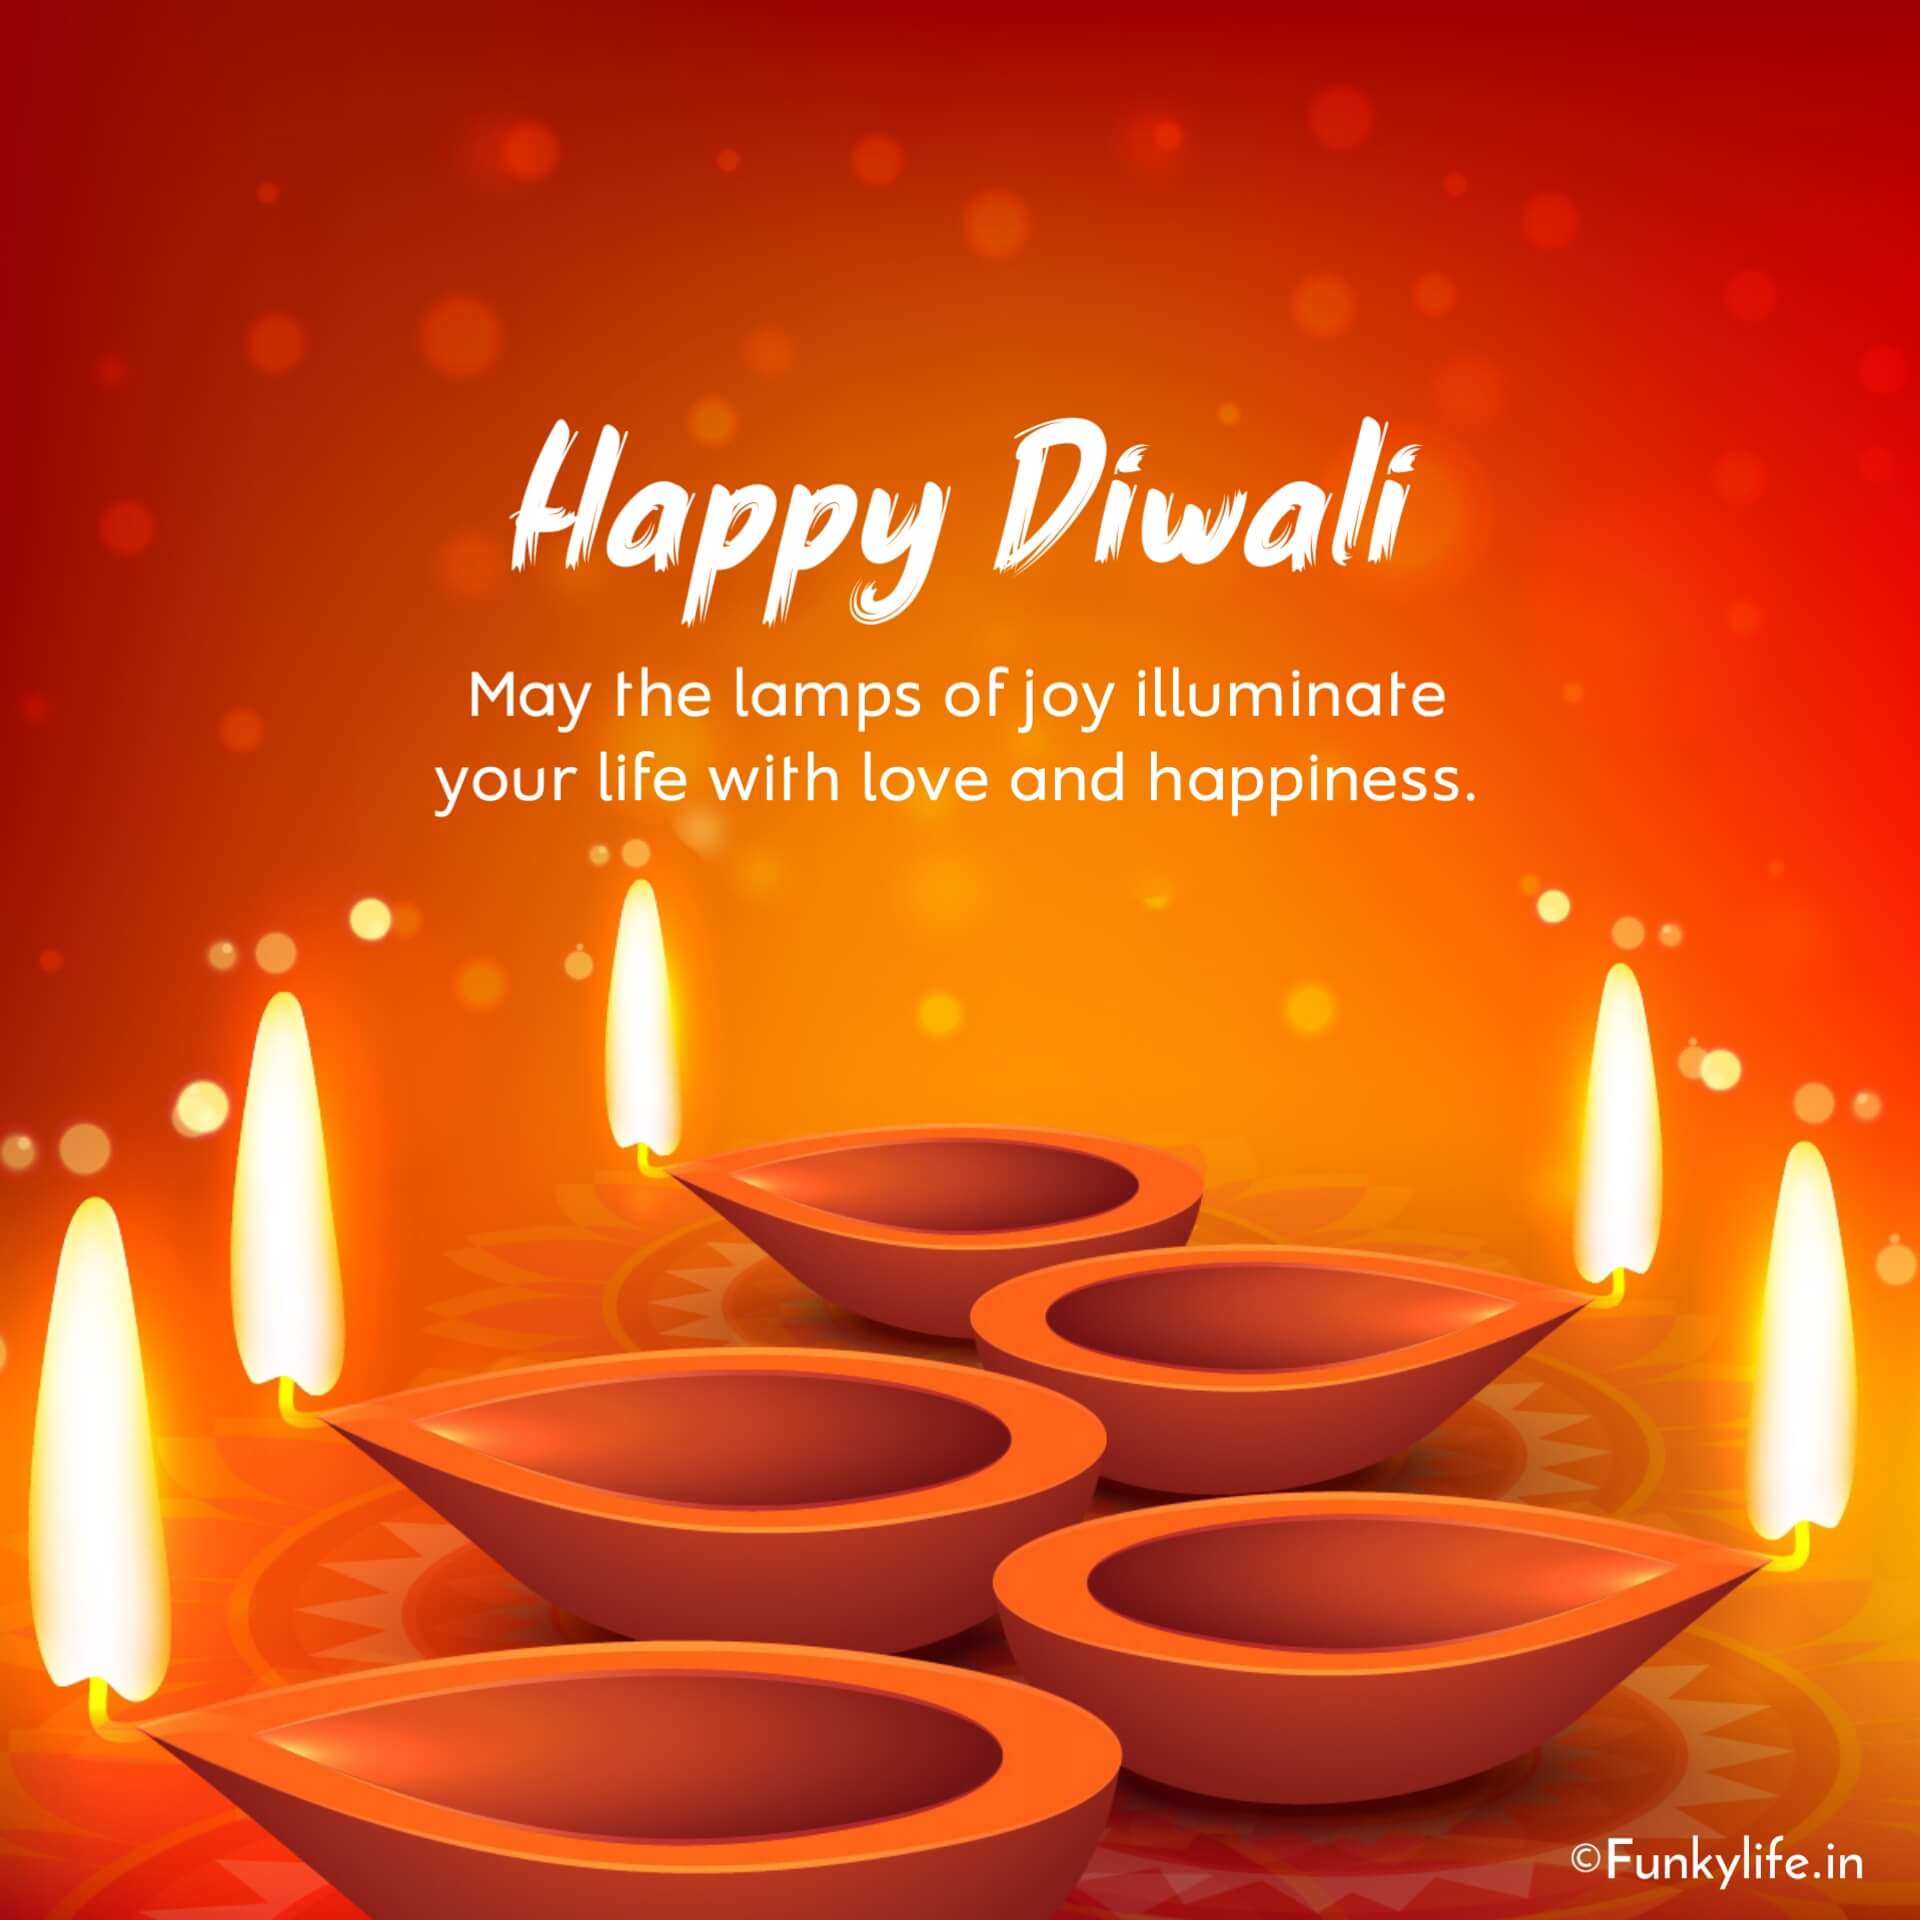 Diwali Wishes Images 